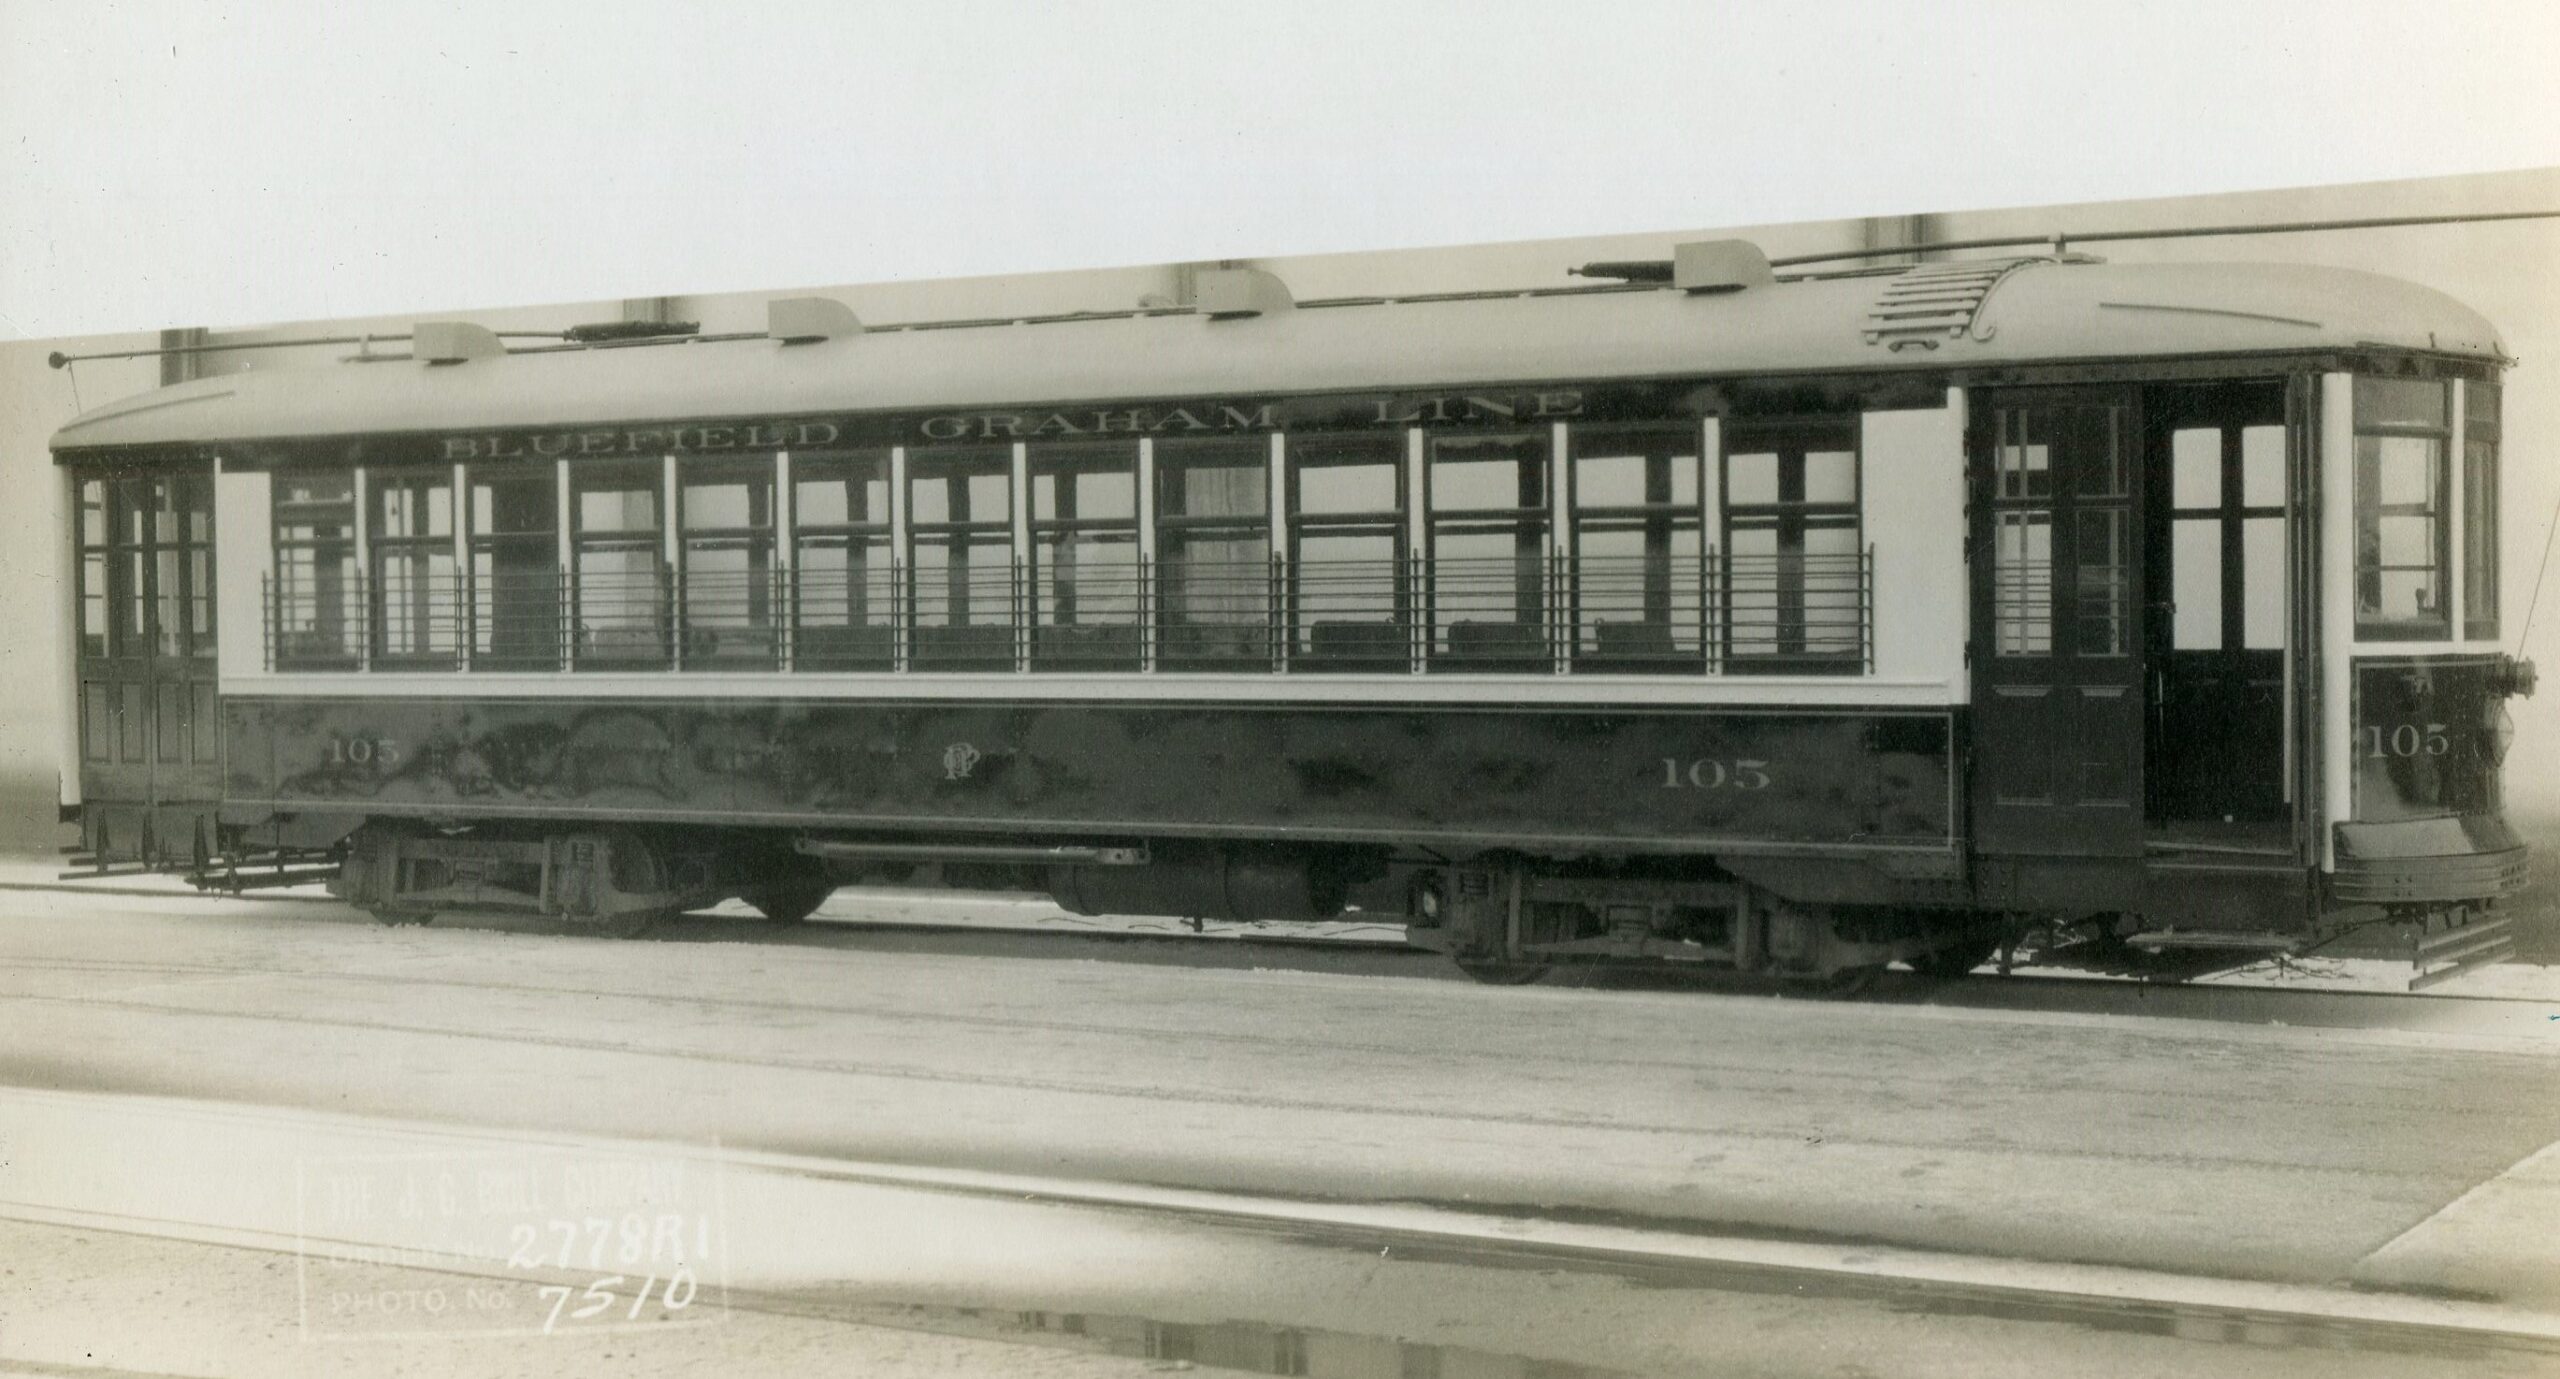 Tri City Traction | Princeton, West Virginia | Brill trolley #105 | 1921 | J.G. Brill Company photograph | North Jersey Chapter NRHS Collection